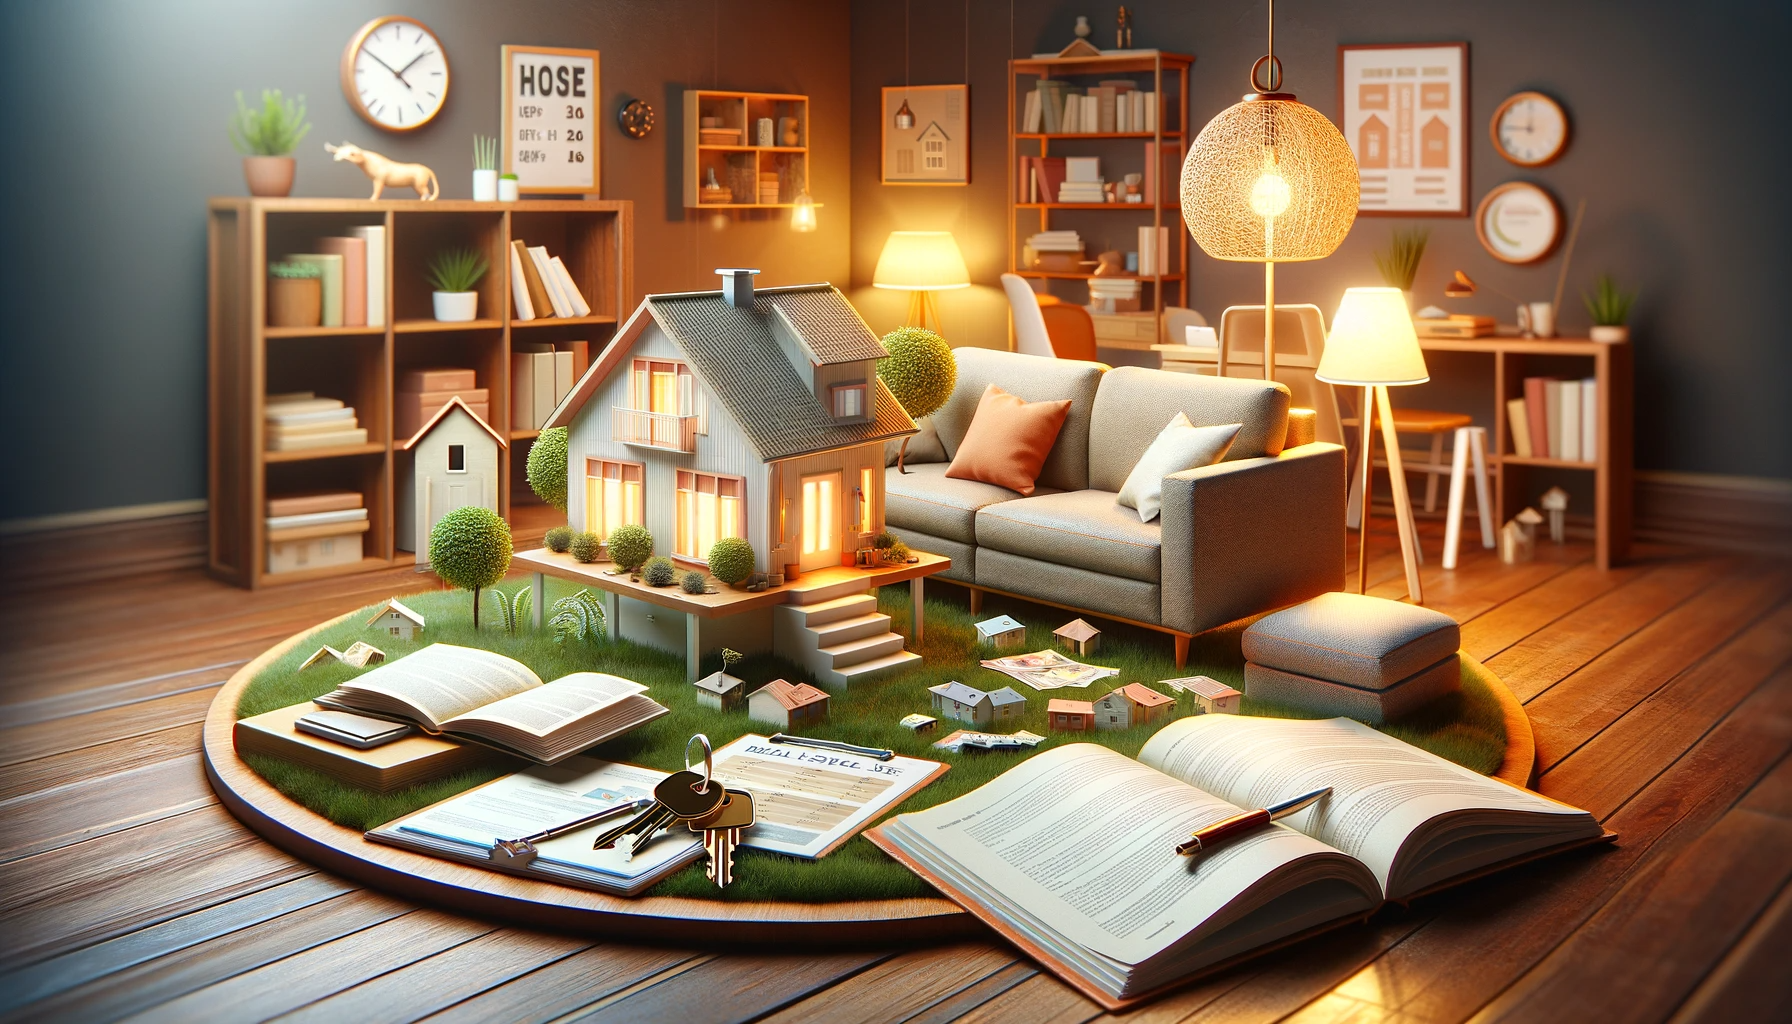 An image of a cozy home setting with real estate elements like a house model, keys, property listings, and guidebooks.